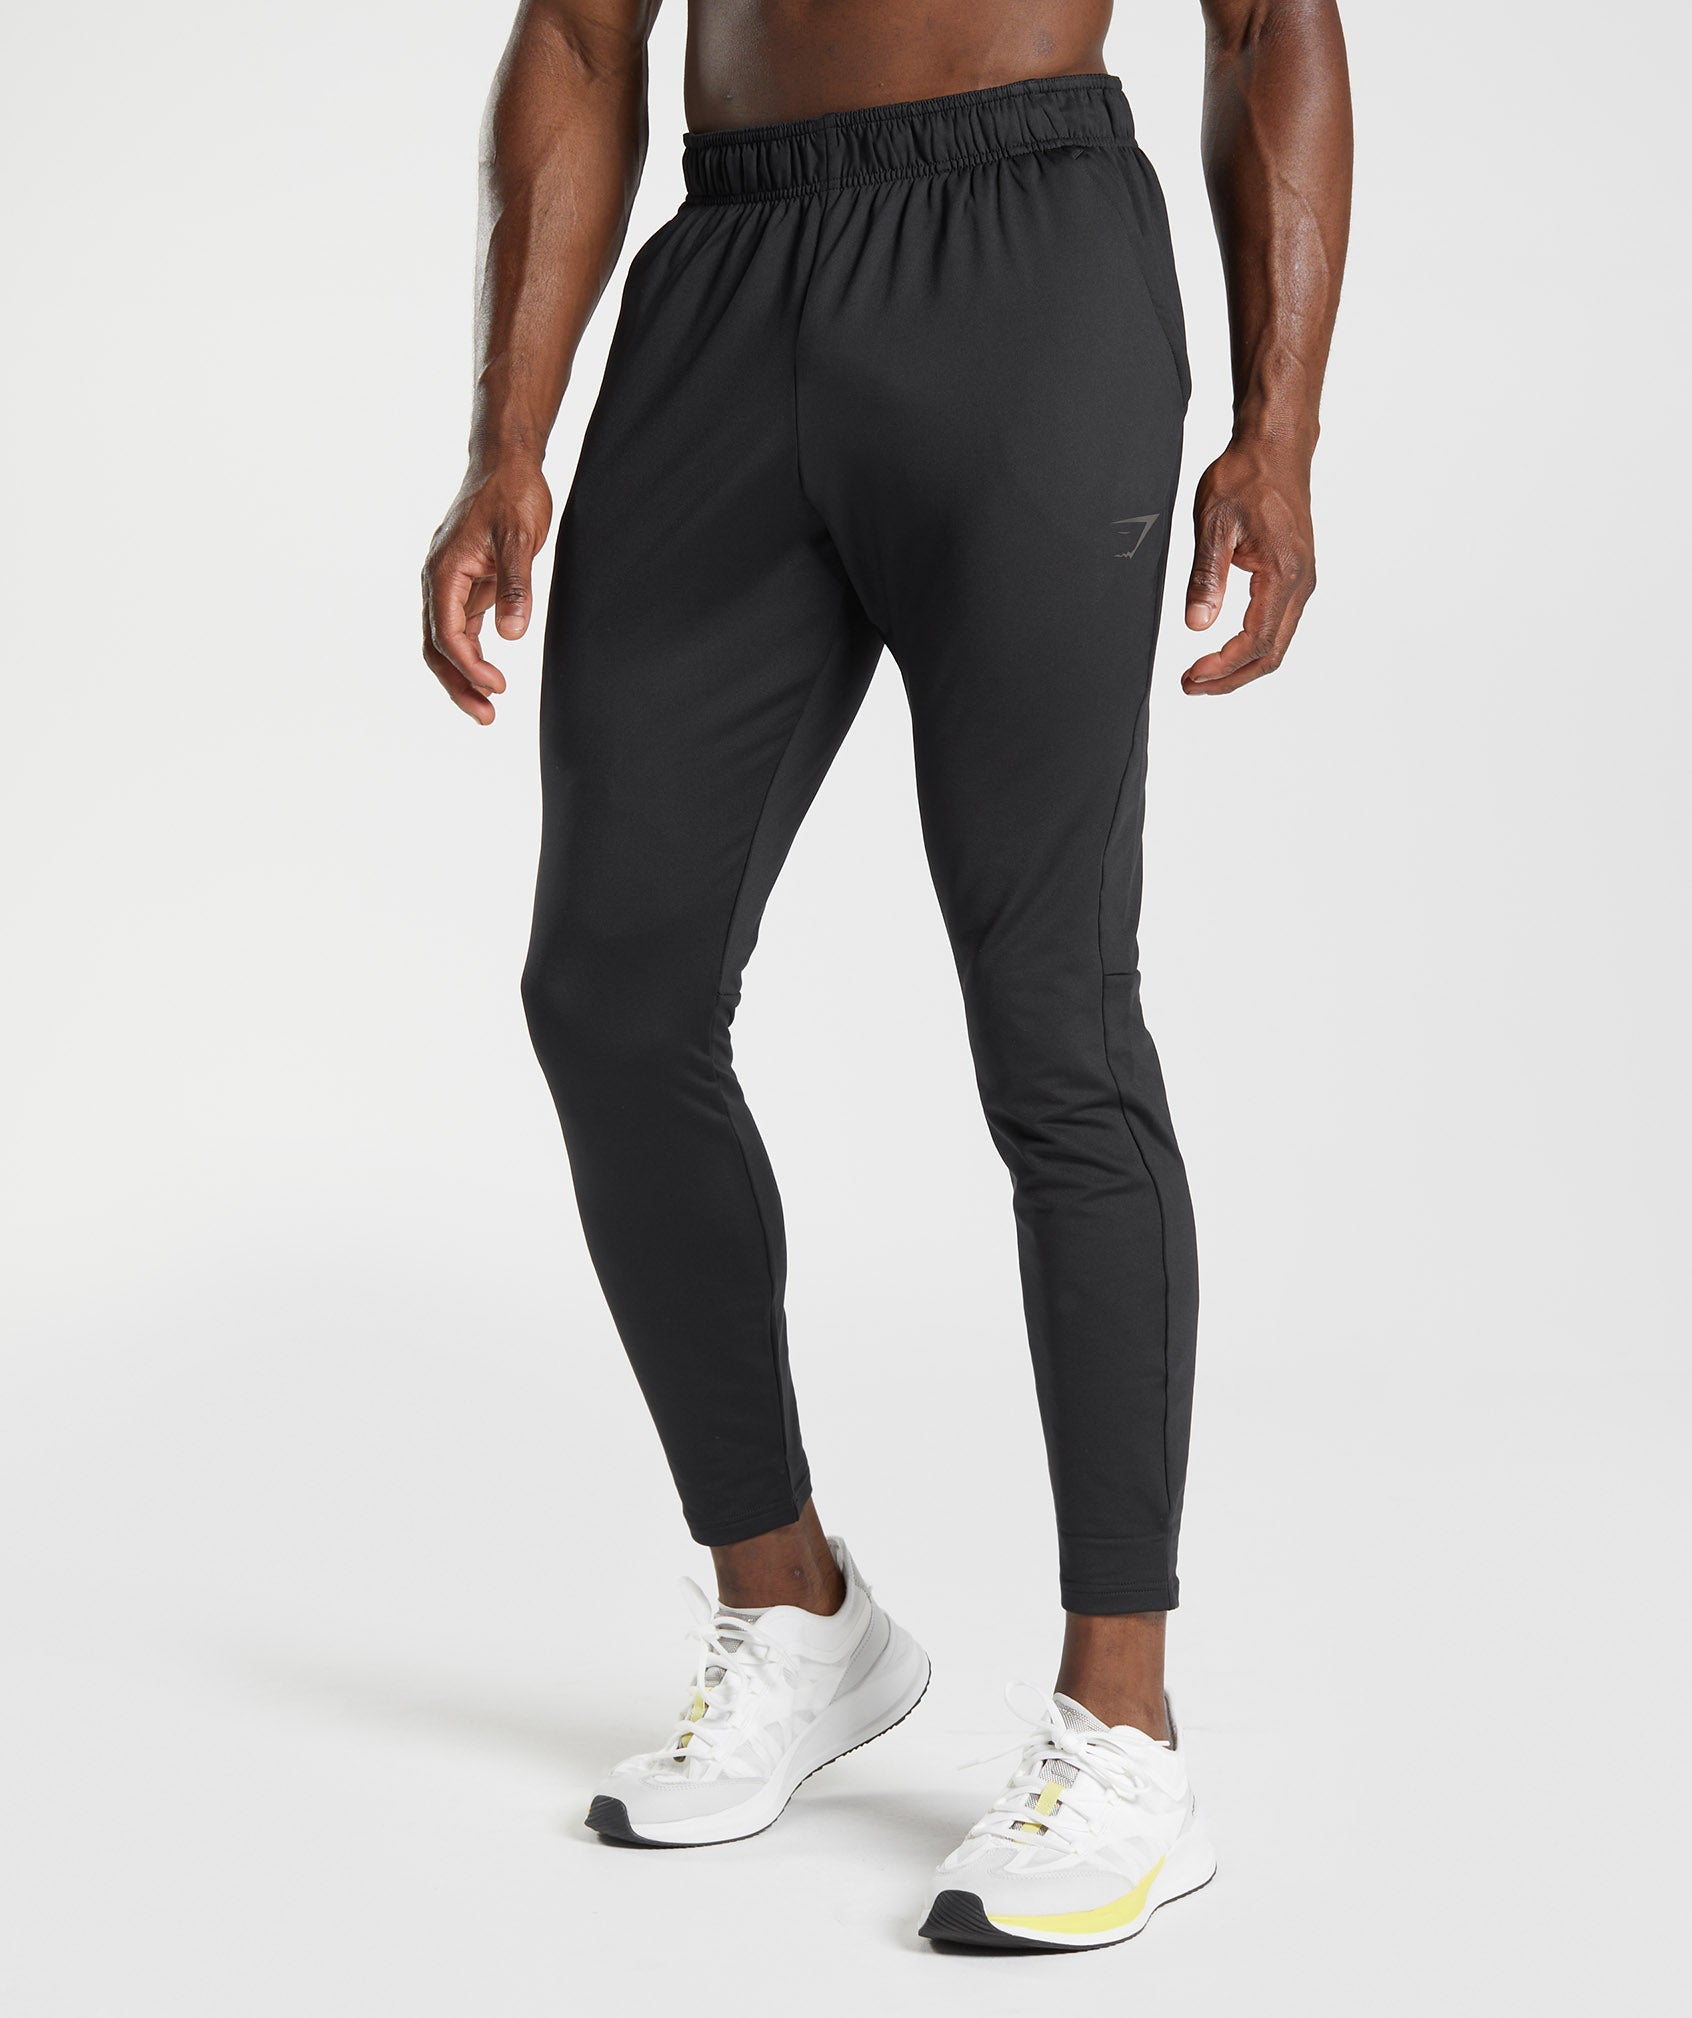 Gymshark Maxed Out Joggers - Black